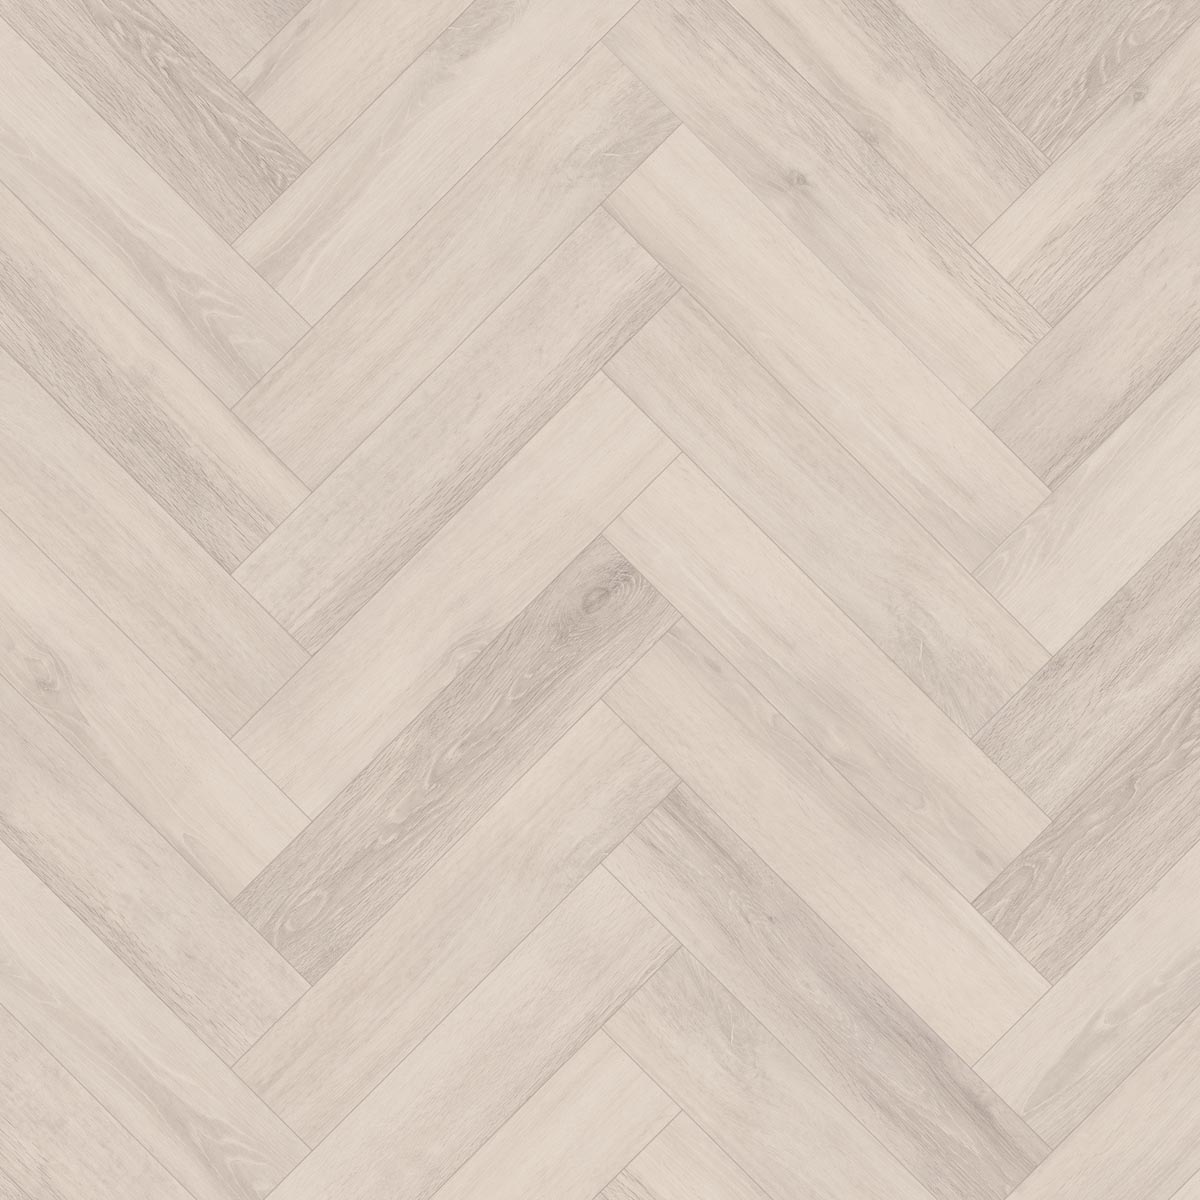 Iced Oak in Large Parquet